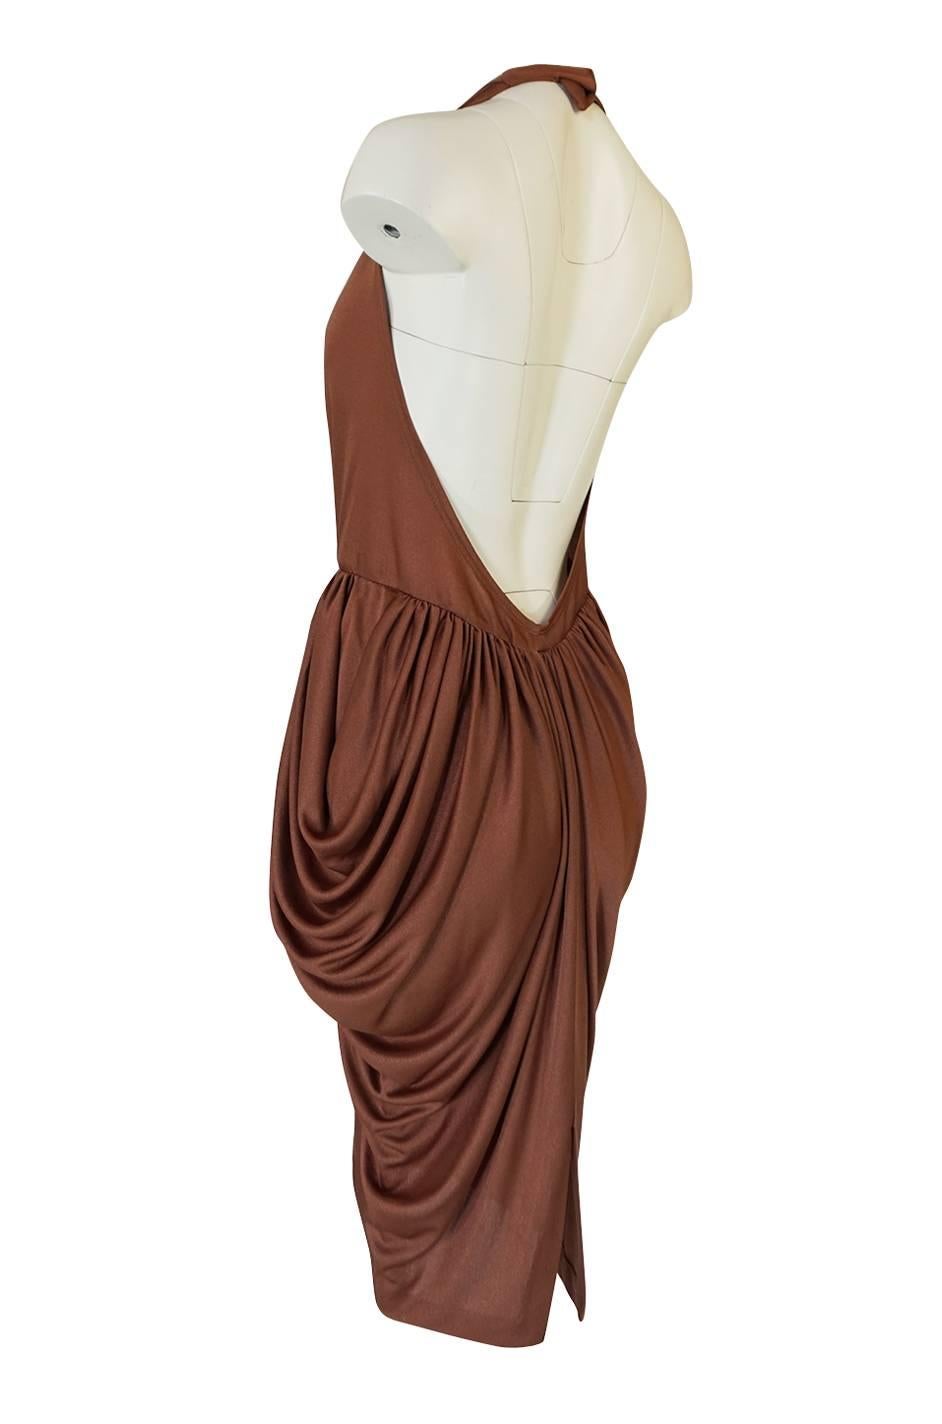 Women's Plunge Front Backless Halter Gathered Sides Jersey Dress, 1970s 